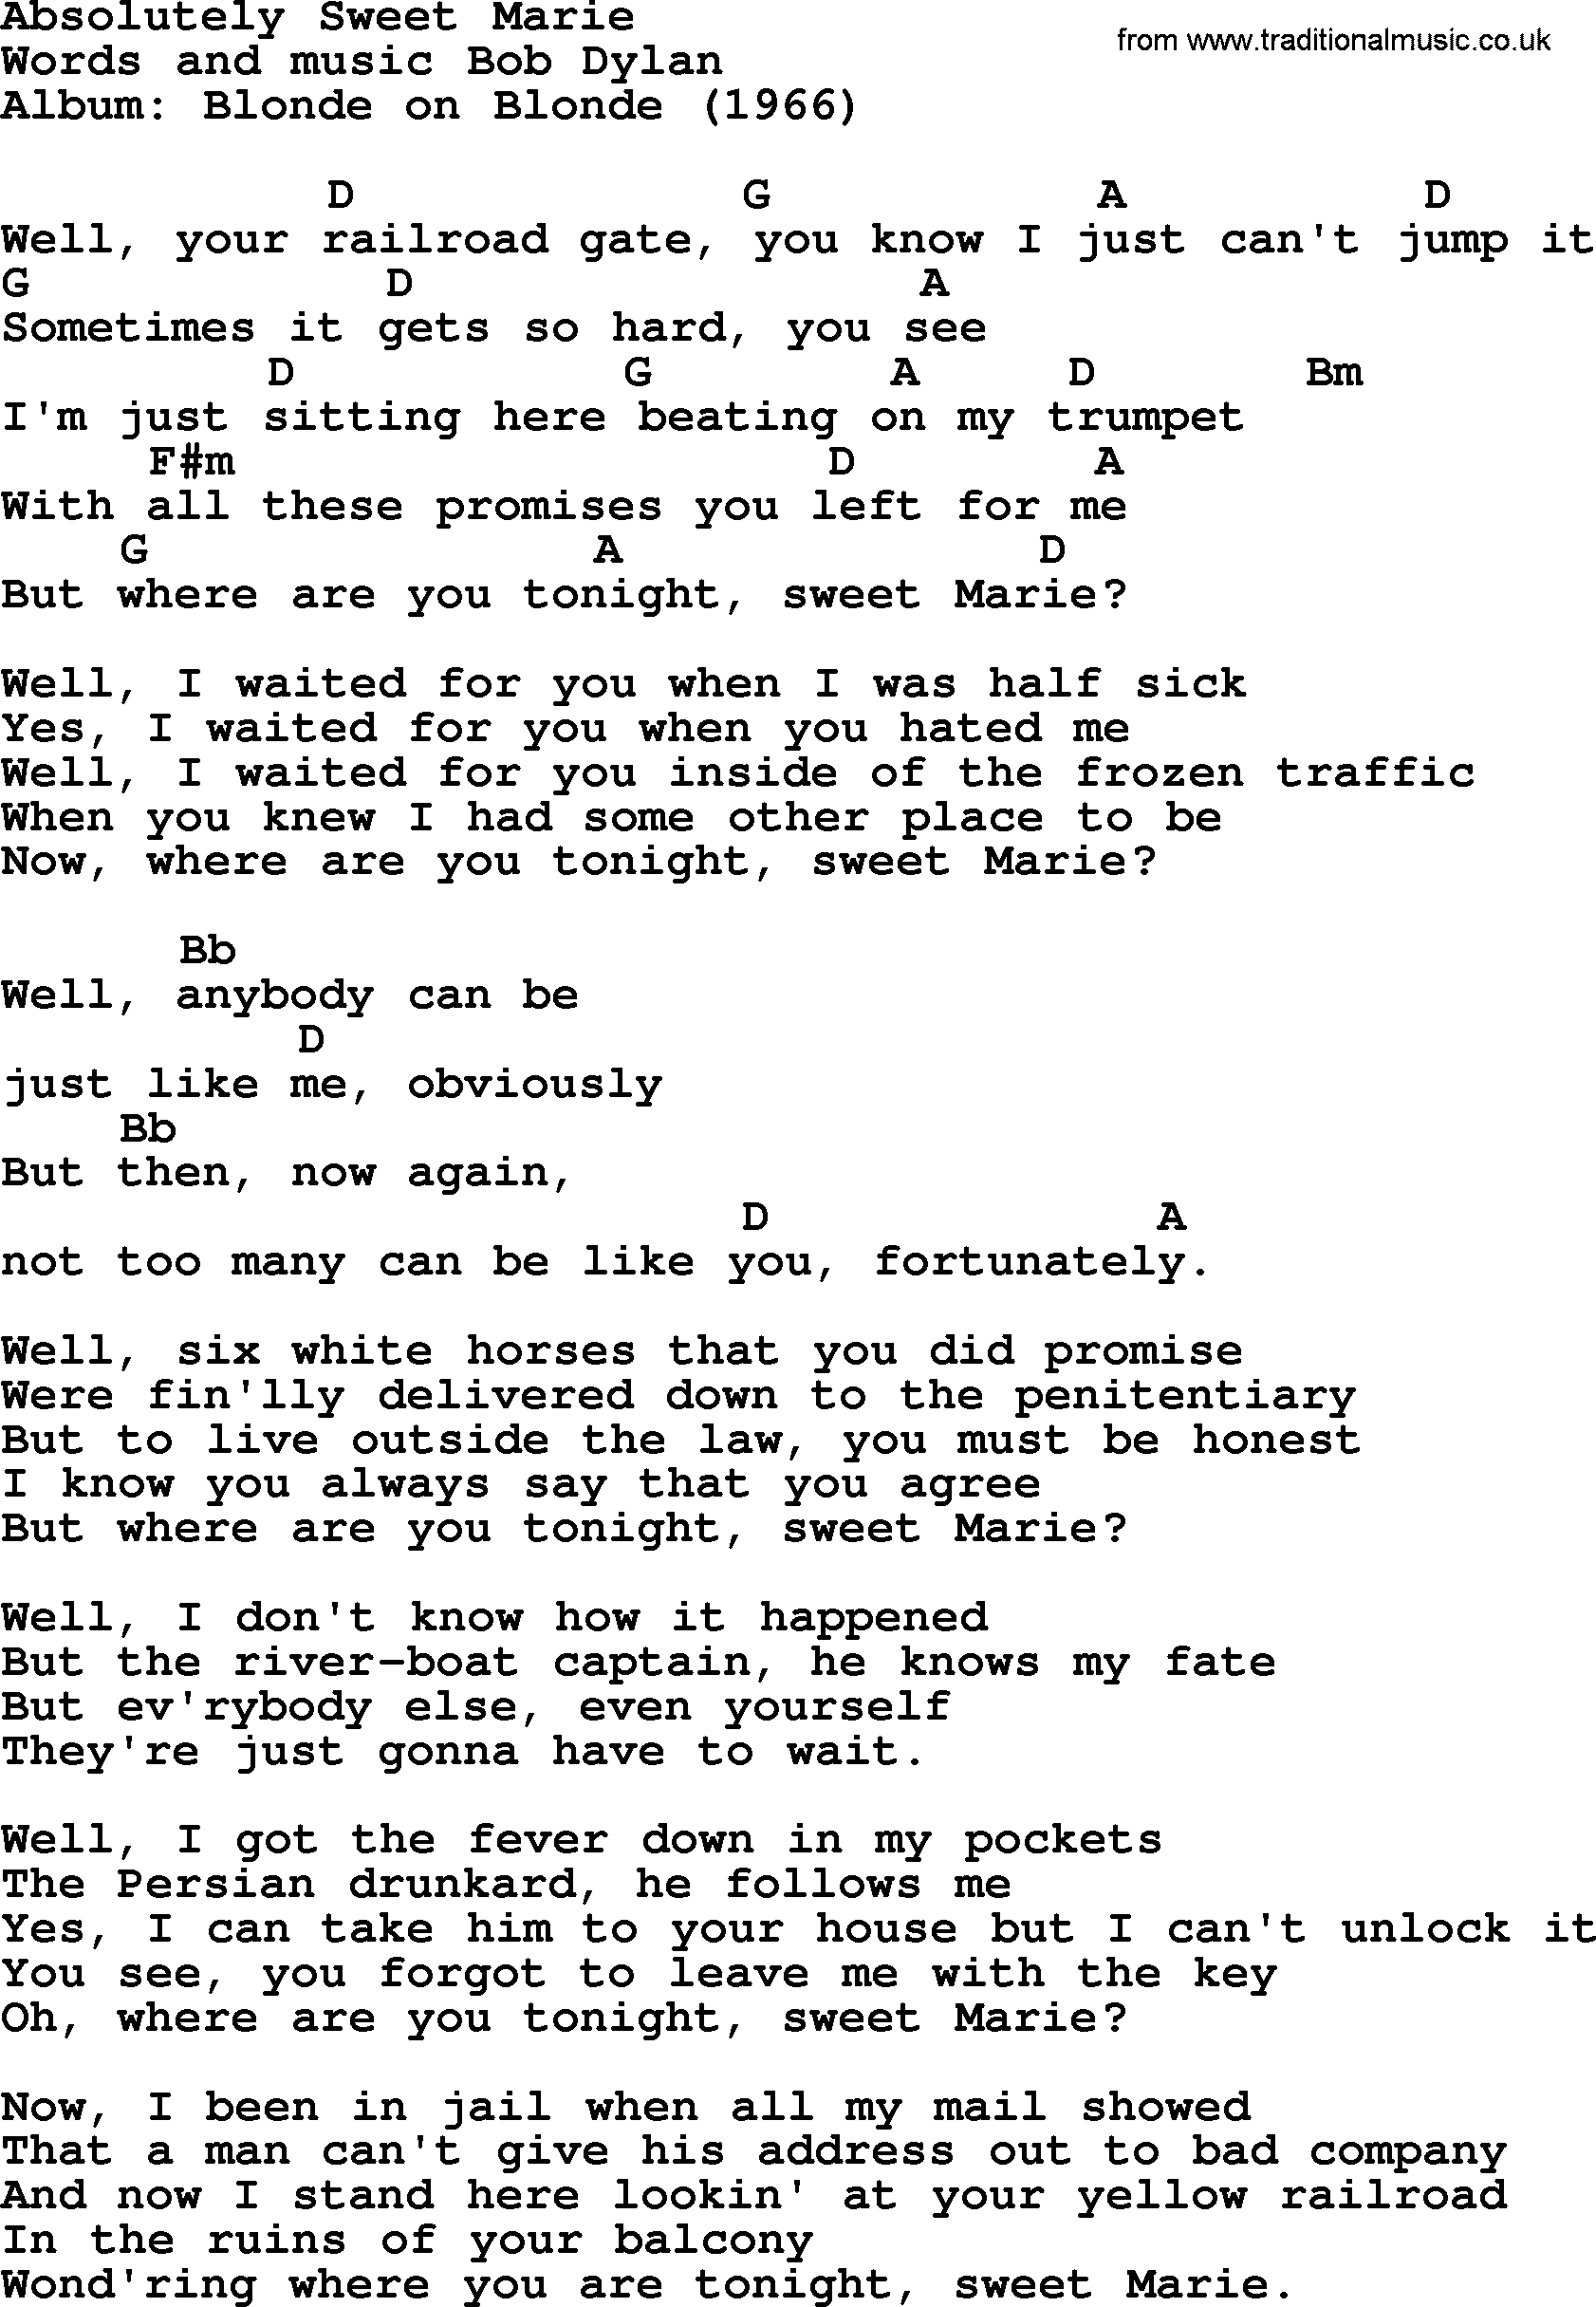 Bob Dylan song, lyrics with chords - Absolutely Sweet Marie